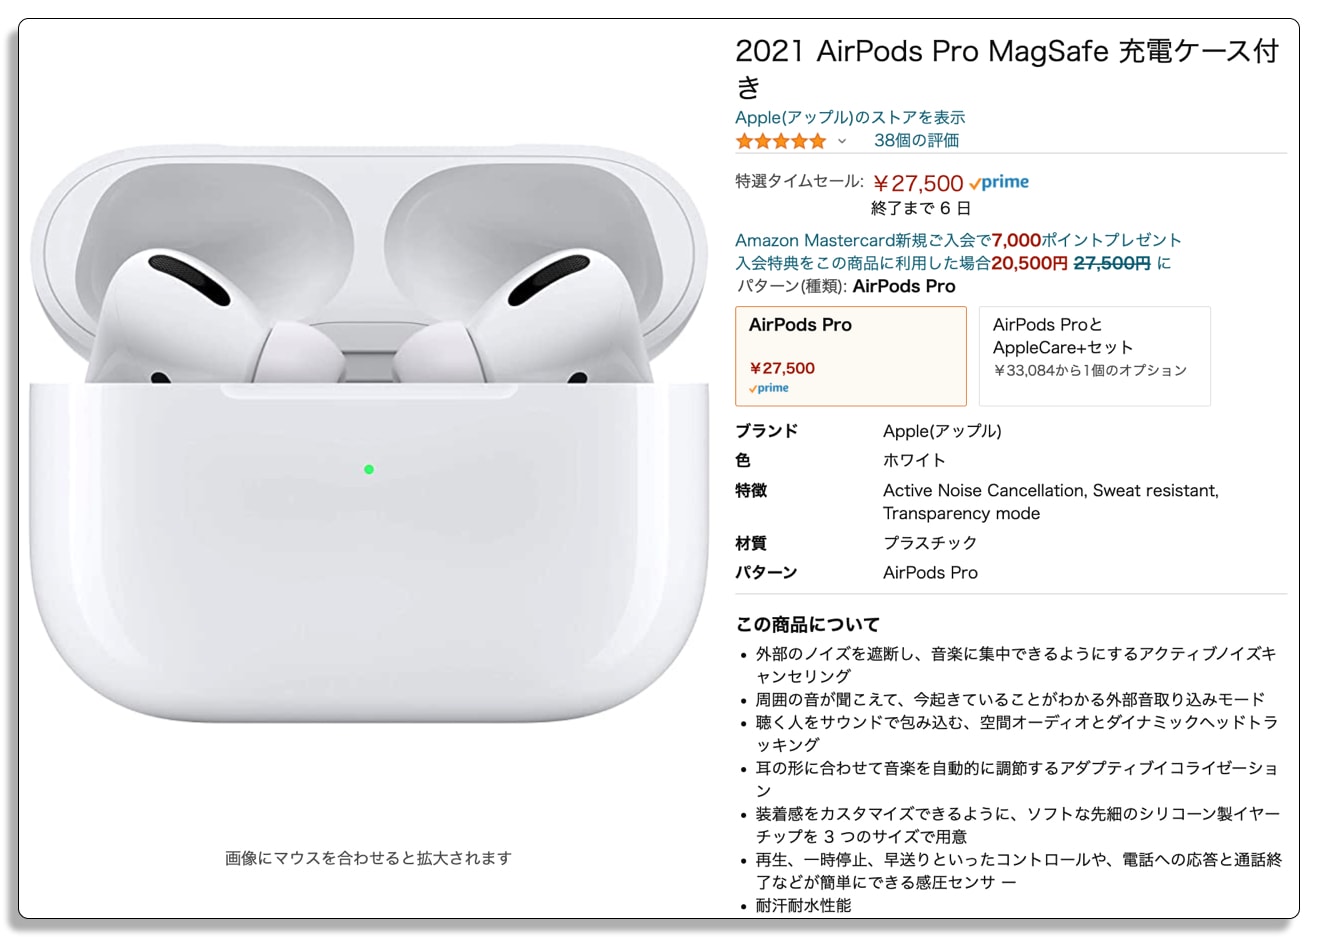 2021 AirPods Pro MagSafe 充電ケース付き｜Amazon